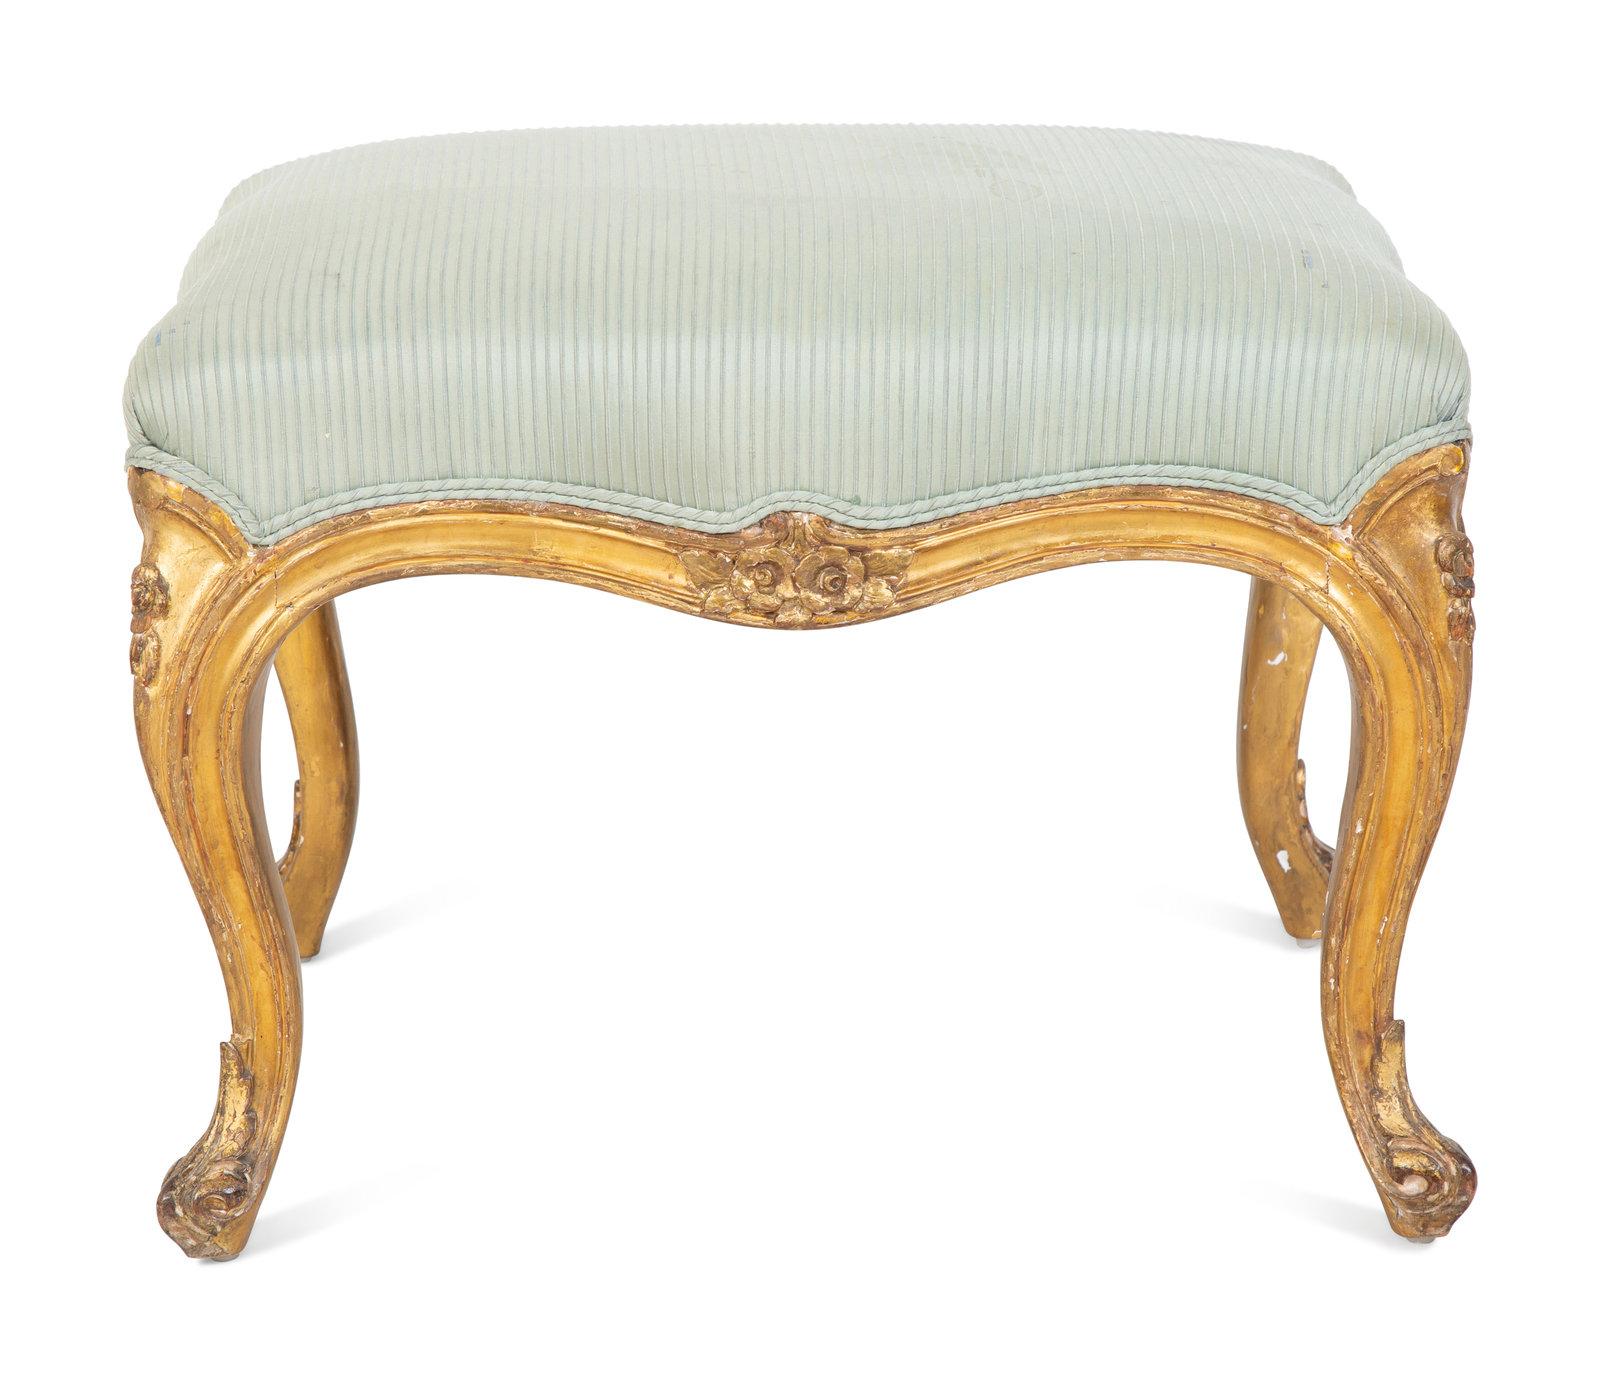 French Louis XV Style Giltwood Tabouret, 19th Century